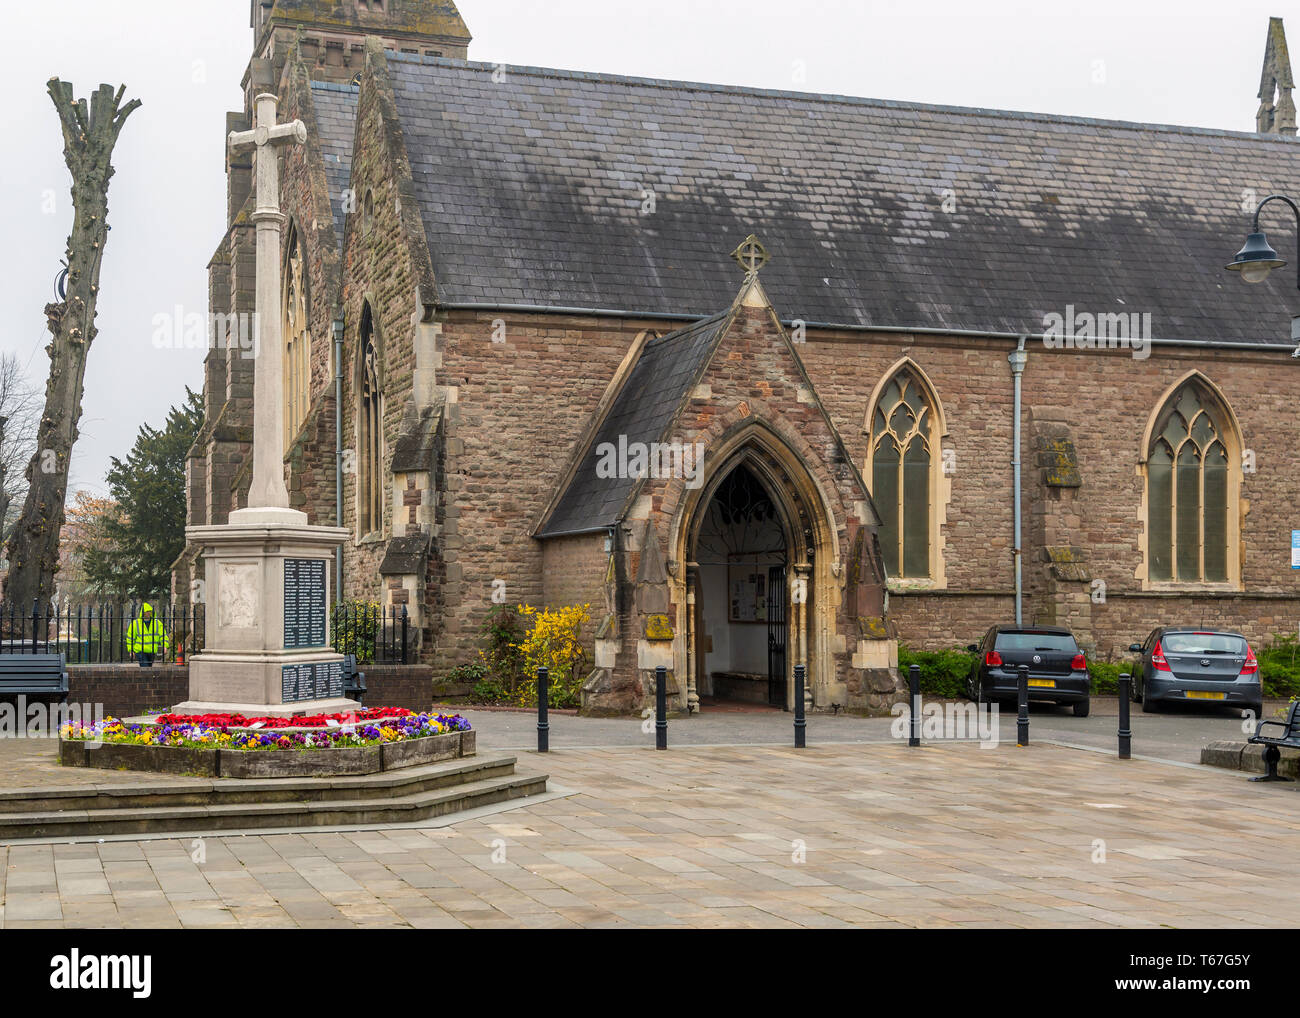 St. Stephens Church in Redditch, Worcestershire, UK Stock Photo